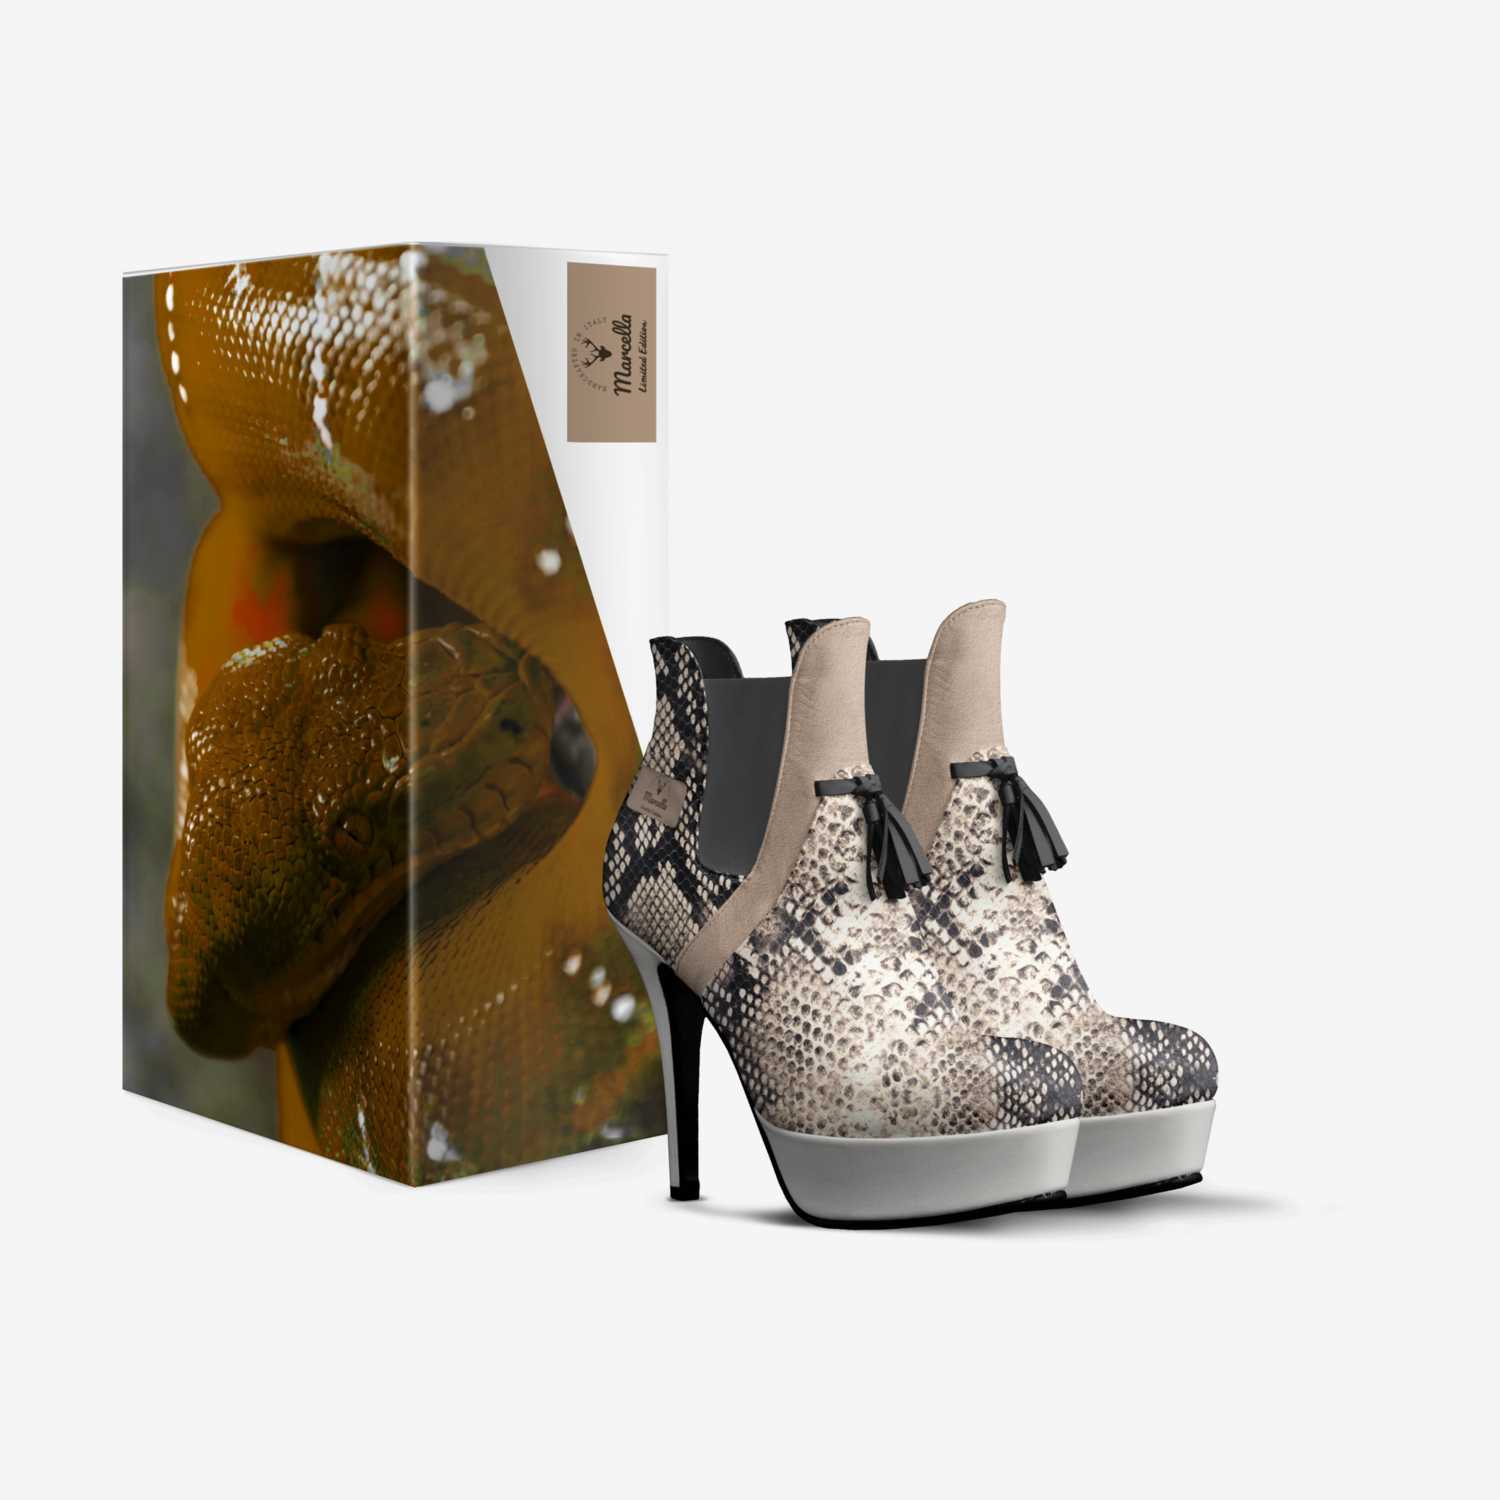 Marcella custom made in Italy shoes by Travis Michael | Box view